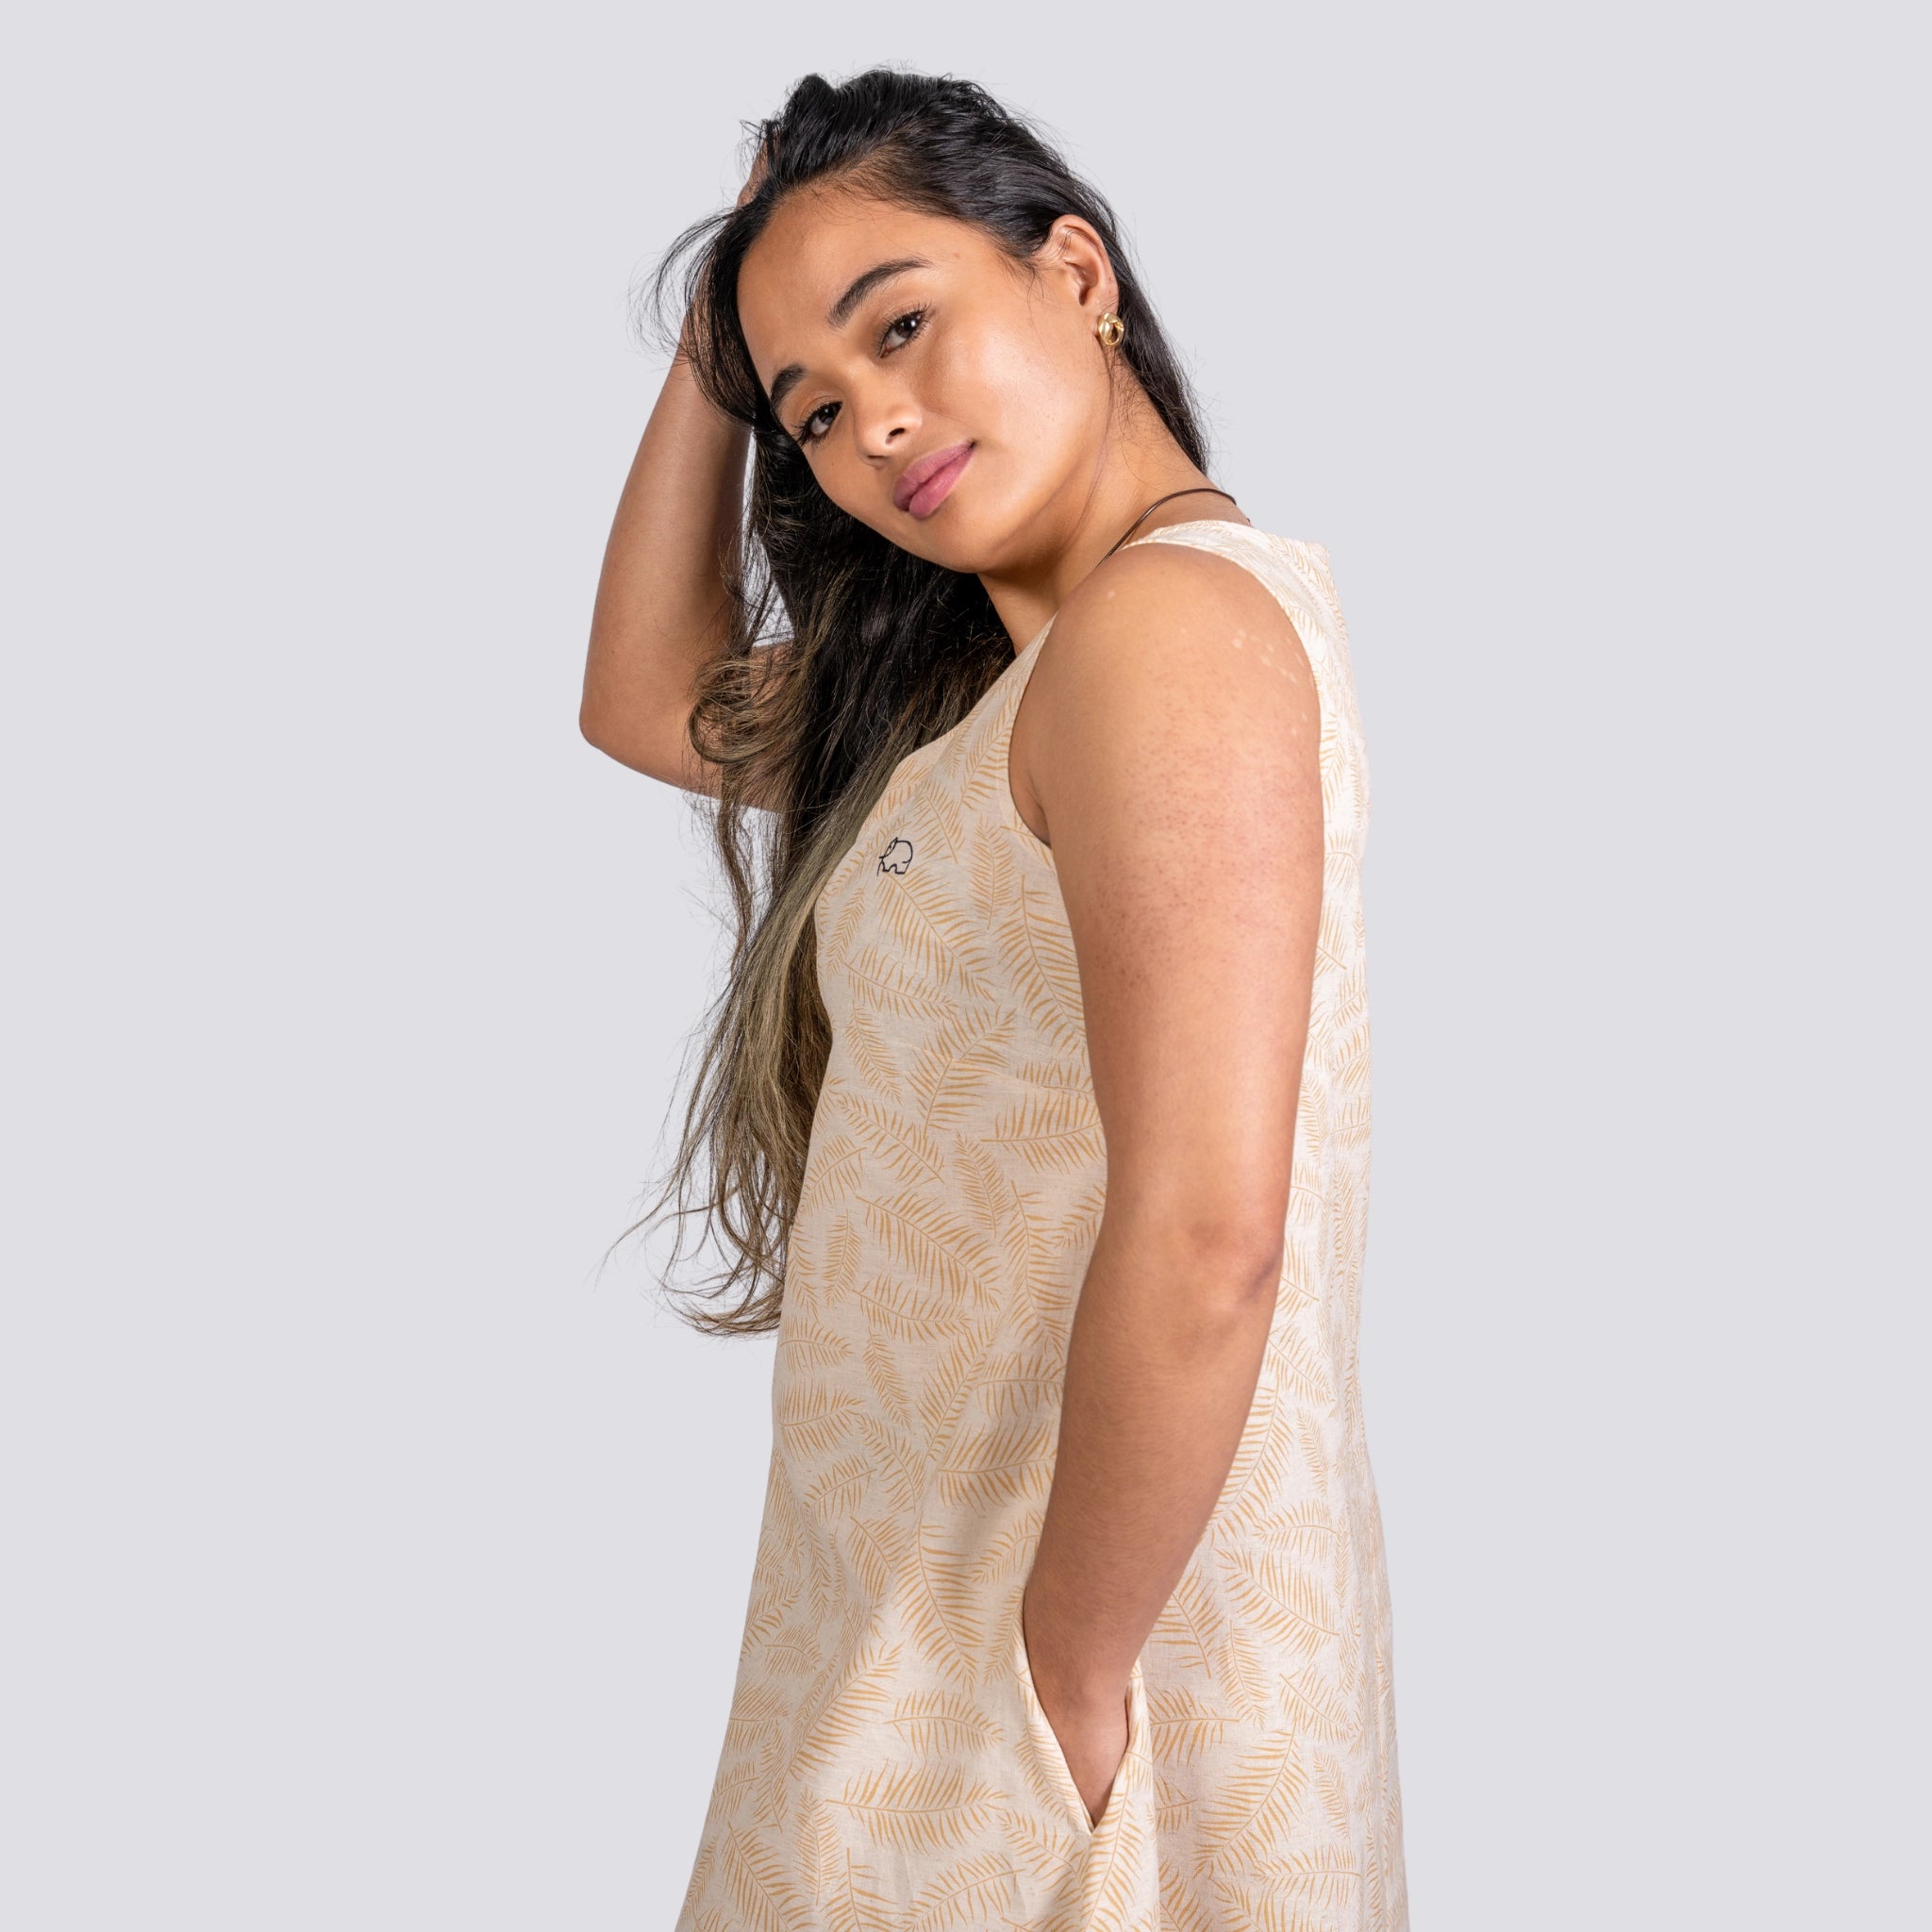 A woman in a beige, sleeveless U-neck Karee Mystic Serenity High Low Linen Cotton Midi Dress with a feather pattern looks over her shoulder, with a hand in her hair, against a light gray background.